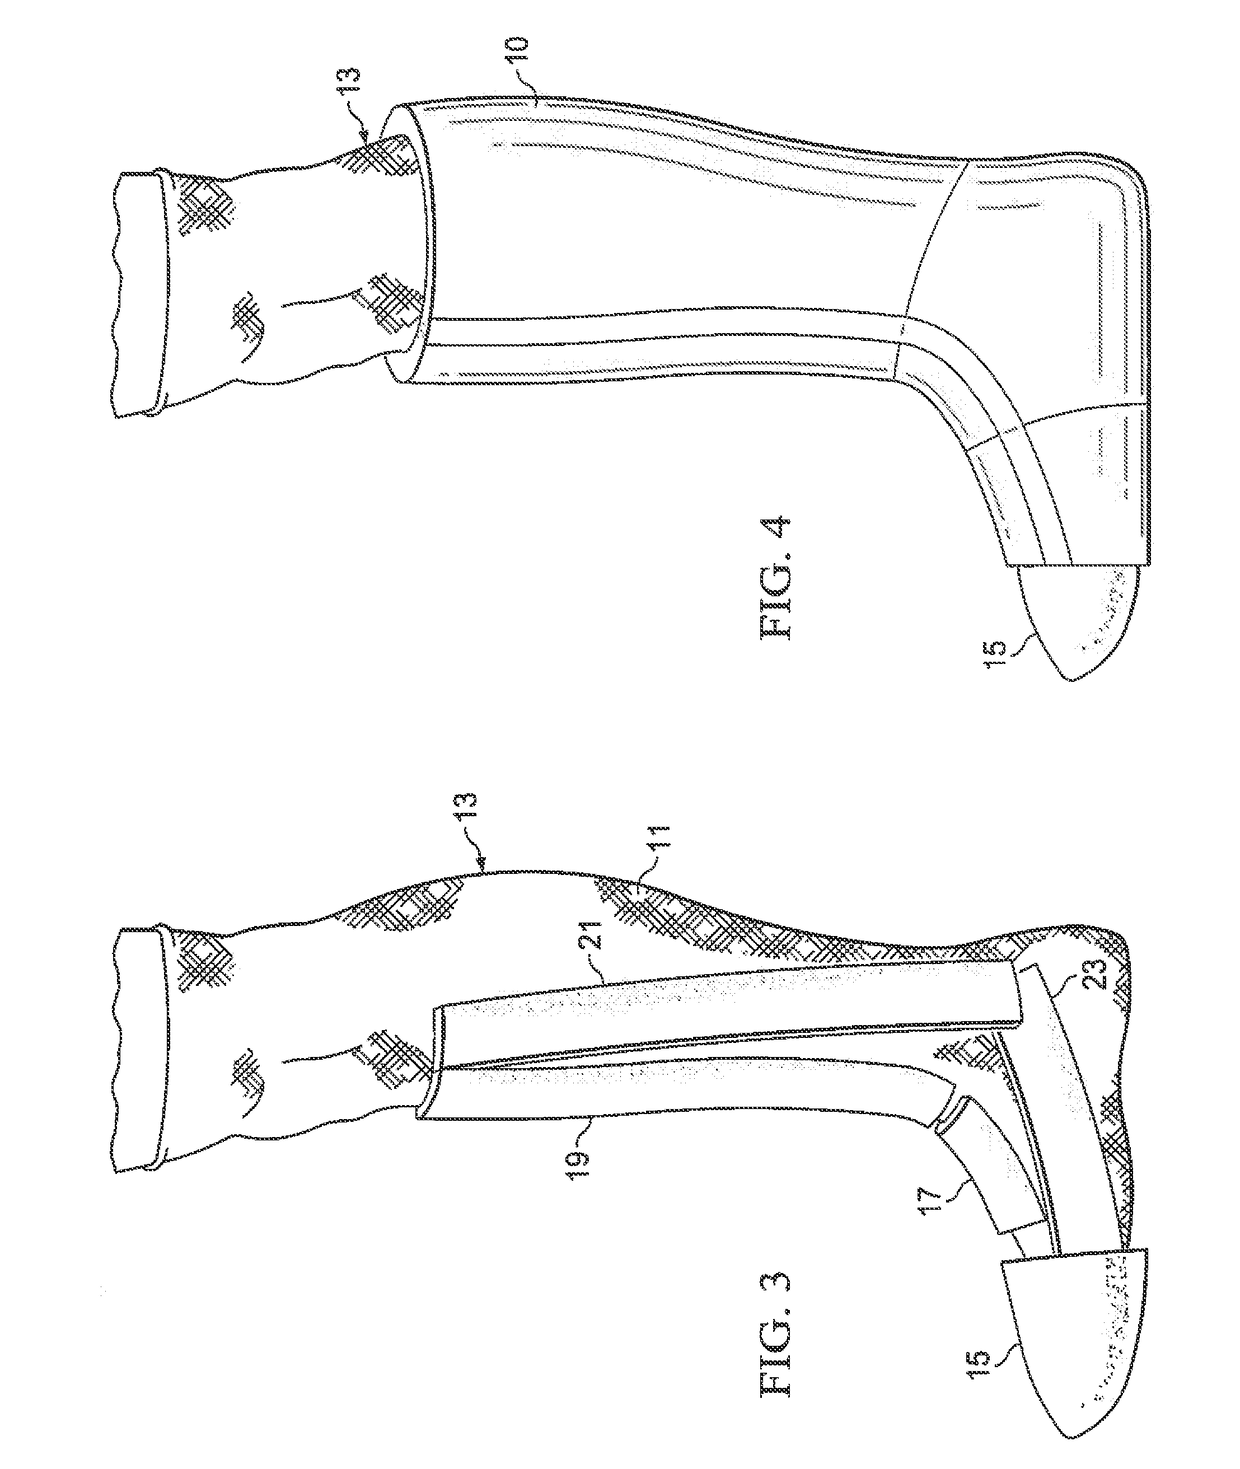 Full Contact Orthopedic Cast and Method